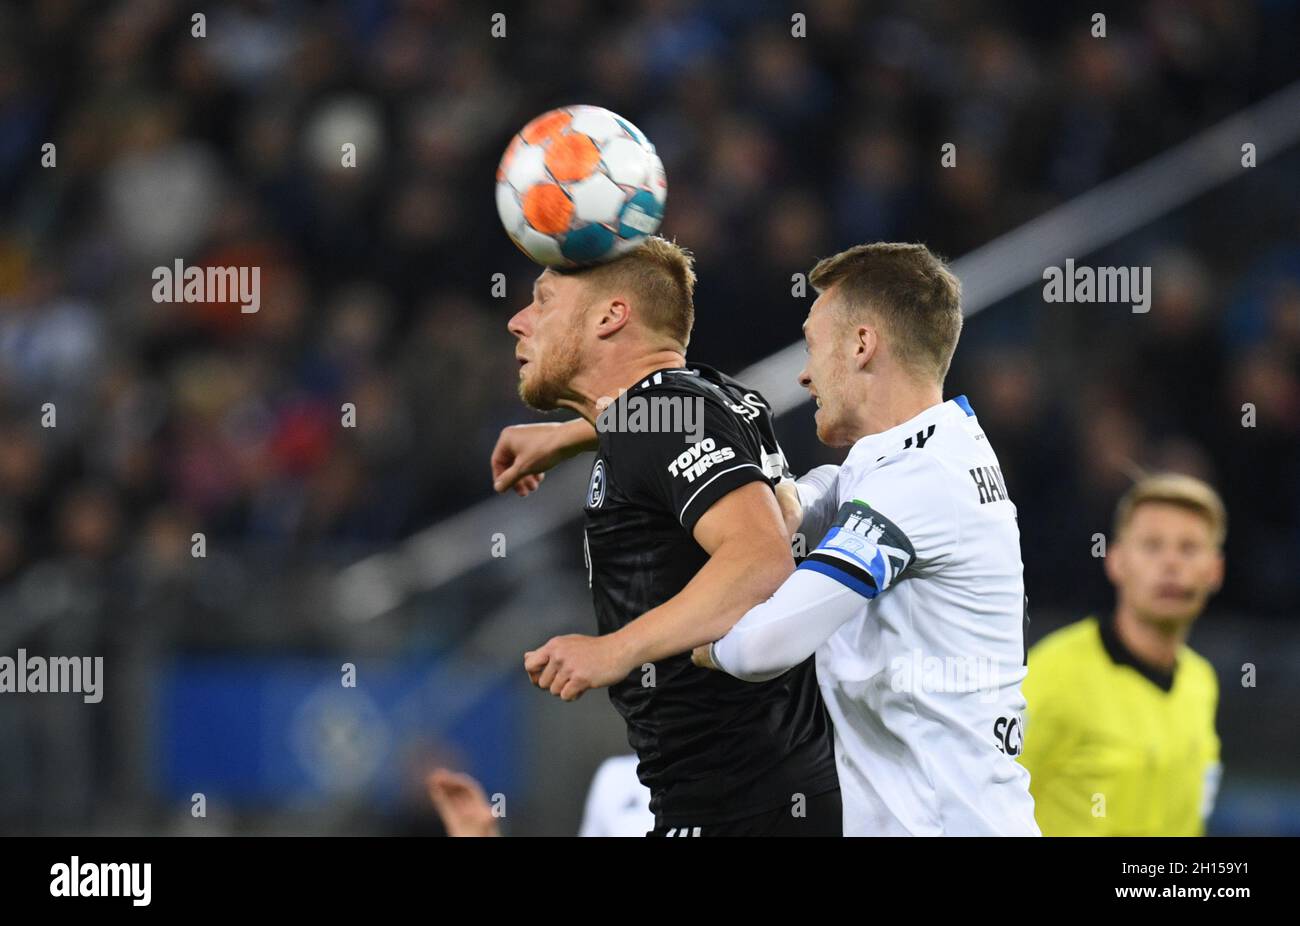 Hamburg, Germany. 16th Oct, 2021. Football: 2nd Bundesliga, Matchday 10: Hamburger SV - Fortuna Düsseldorf at Volksparkstadion. Hamburg's Sebastian Schonlau (r) and Düsseldorf's Rouwen Hennings fight for the ball. Credit: Daniel Reinhardt/dpa - IMPORTANT NOTE: In accordance with the regulations of the DFL Deutsche Fußball Liga and/or the DFB Deutscher Fußball-Bund, it is prohibited to use or have used photographs taken in the stadium and/or of the match in the form of sequence pictures and/or video-like photo series./dpa/Alamy Live News Stock Photo